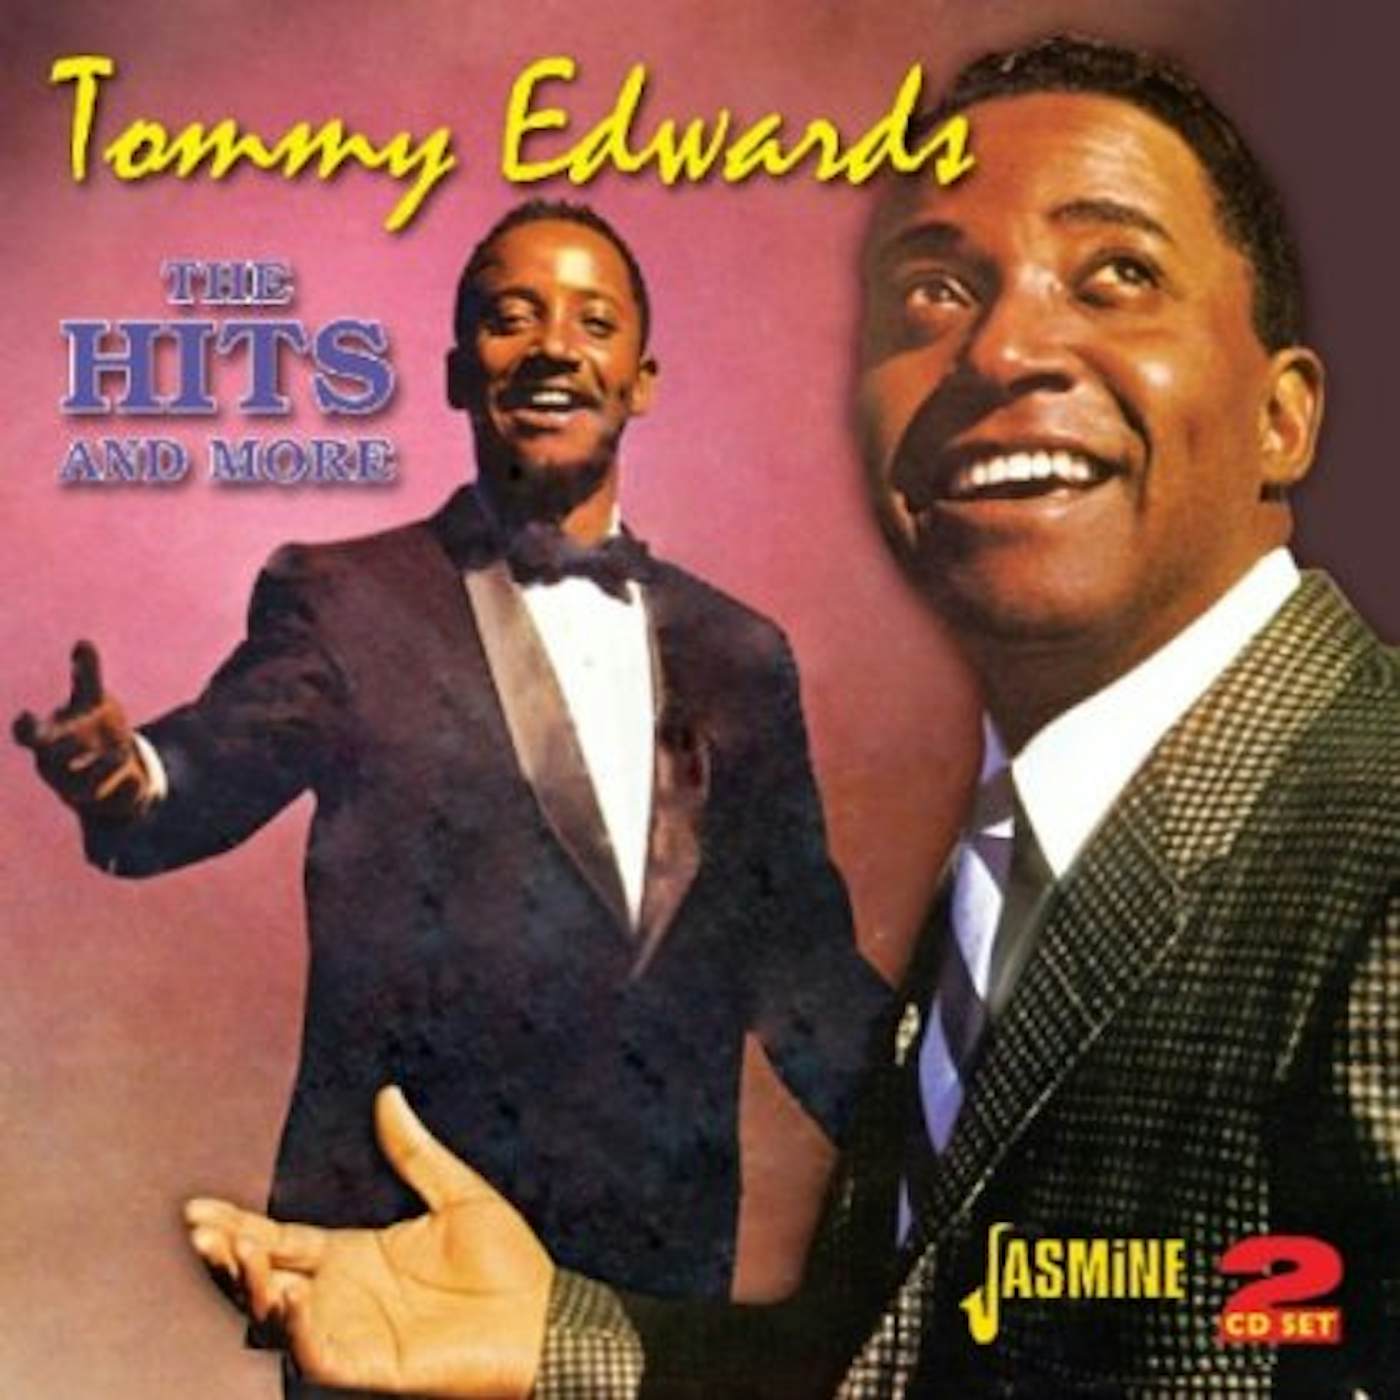 Tommy Edwards HITS & MORE CD